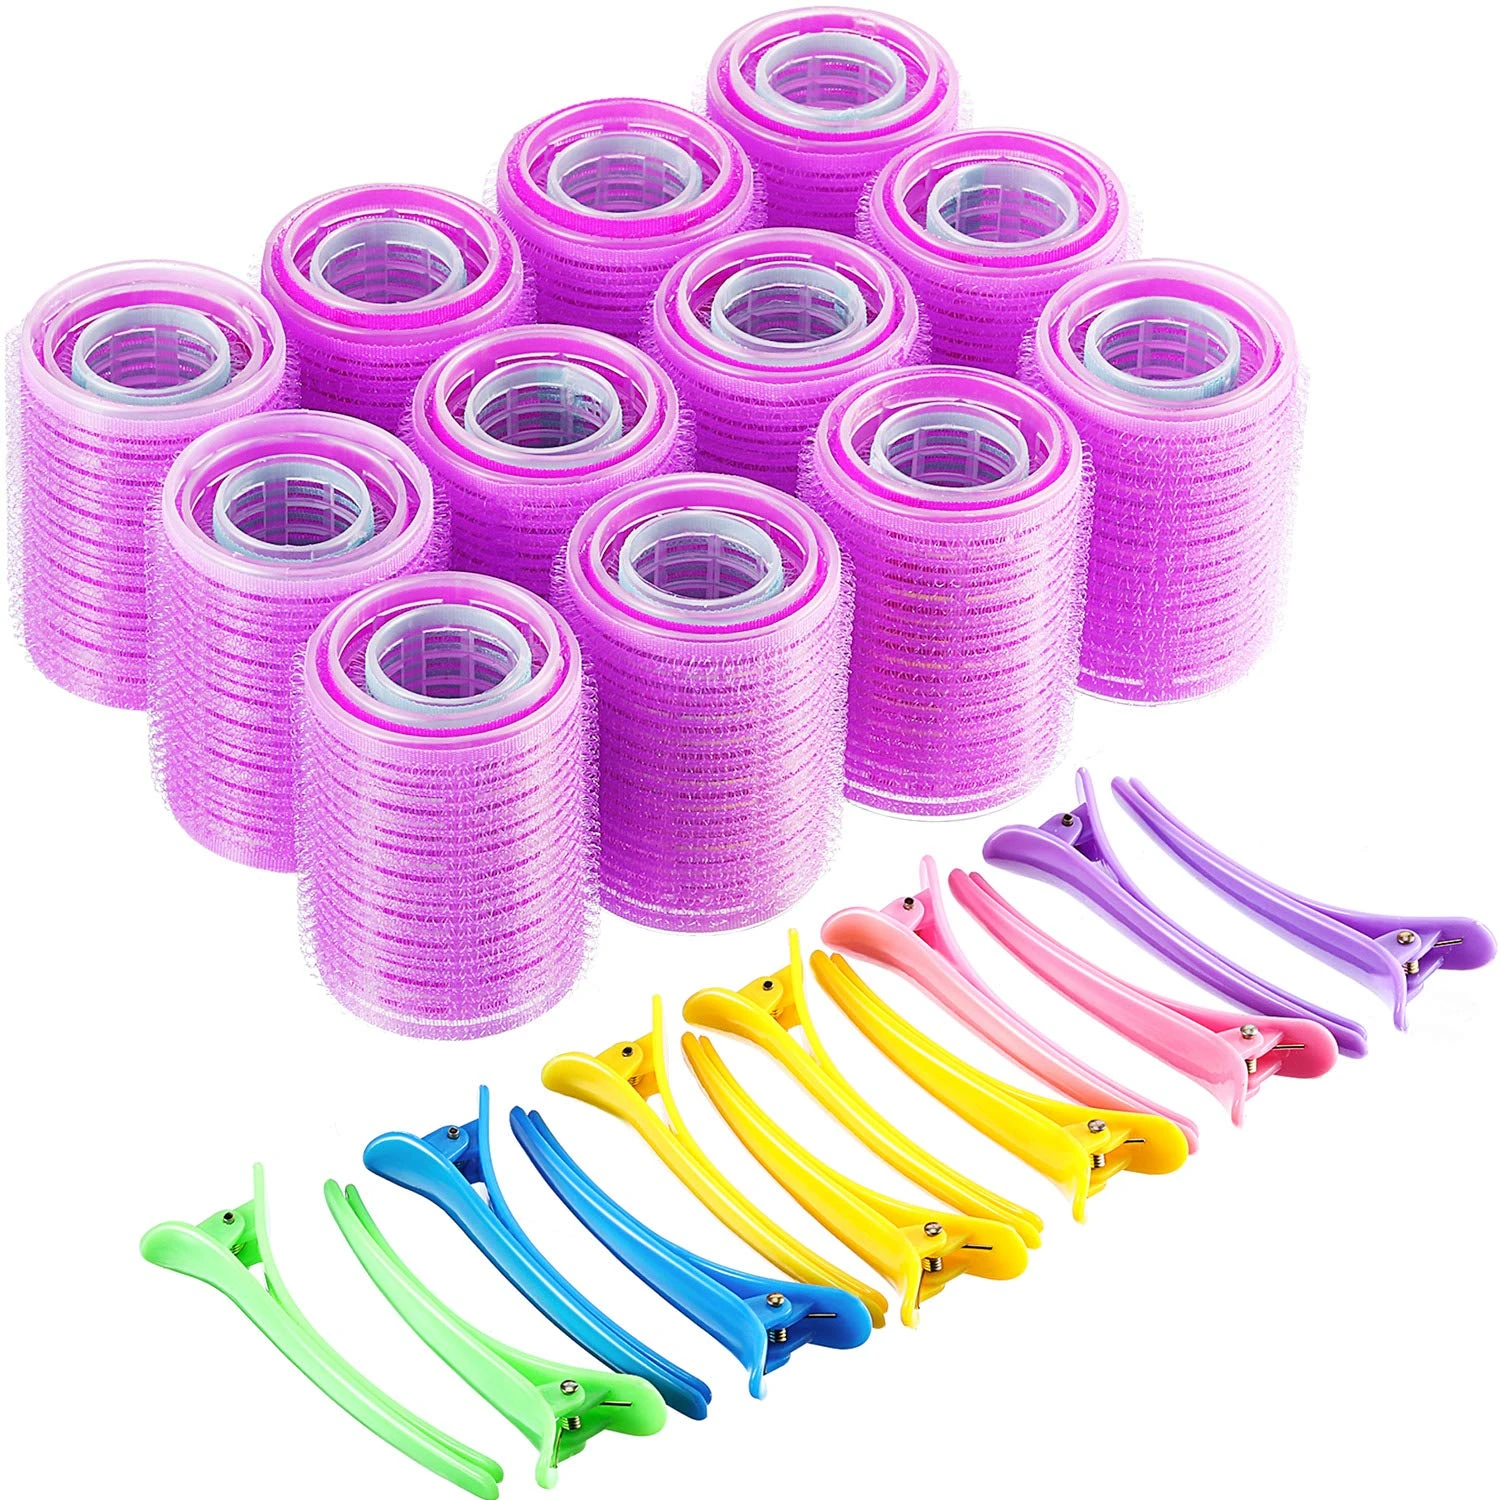 24/36/48 Pcs Self Grip Large Hair Rollers Set, 3 Sizes Heatless Curls with Hair roller Clips, Soft Hair Curlers ,Color Random